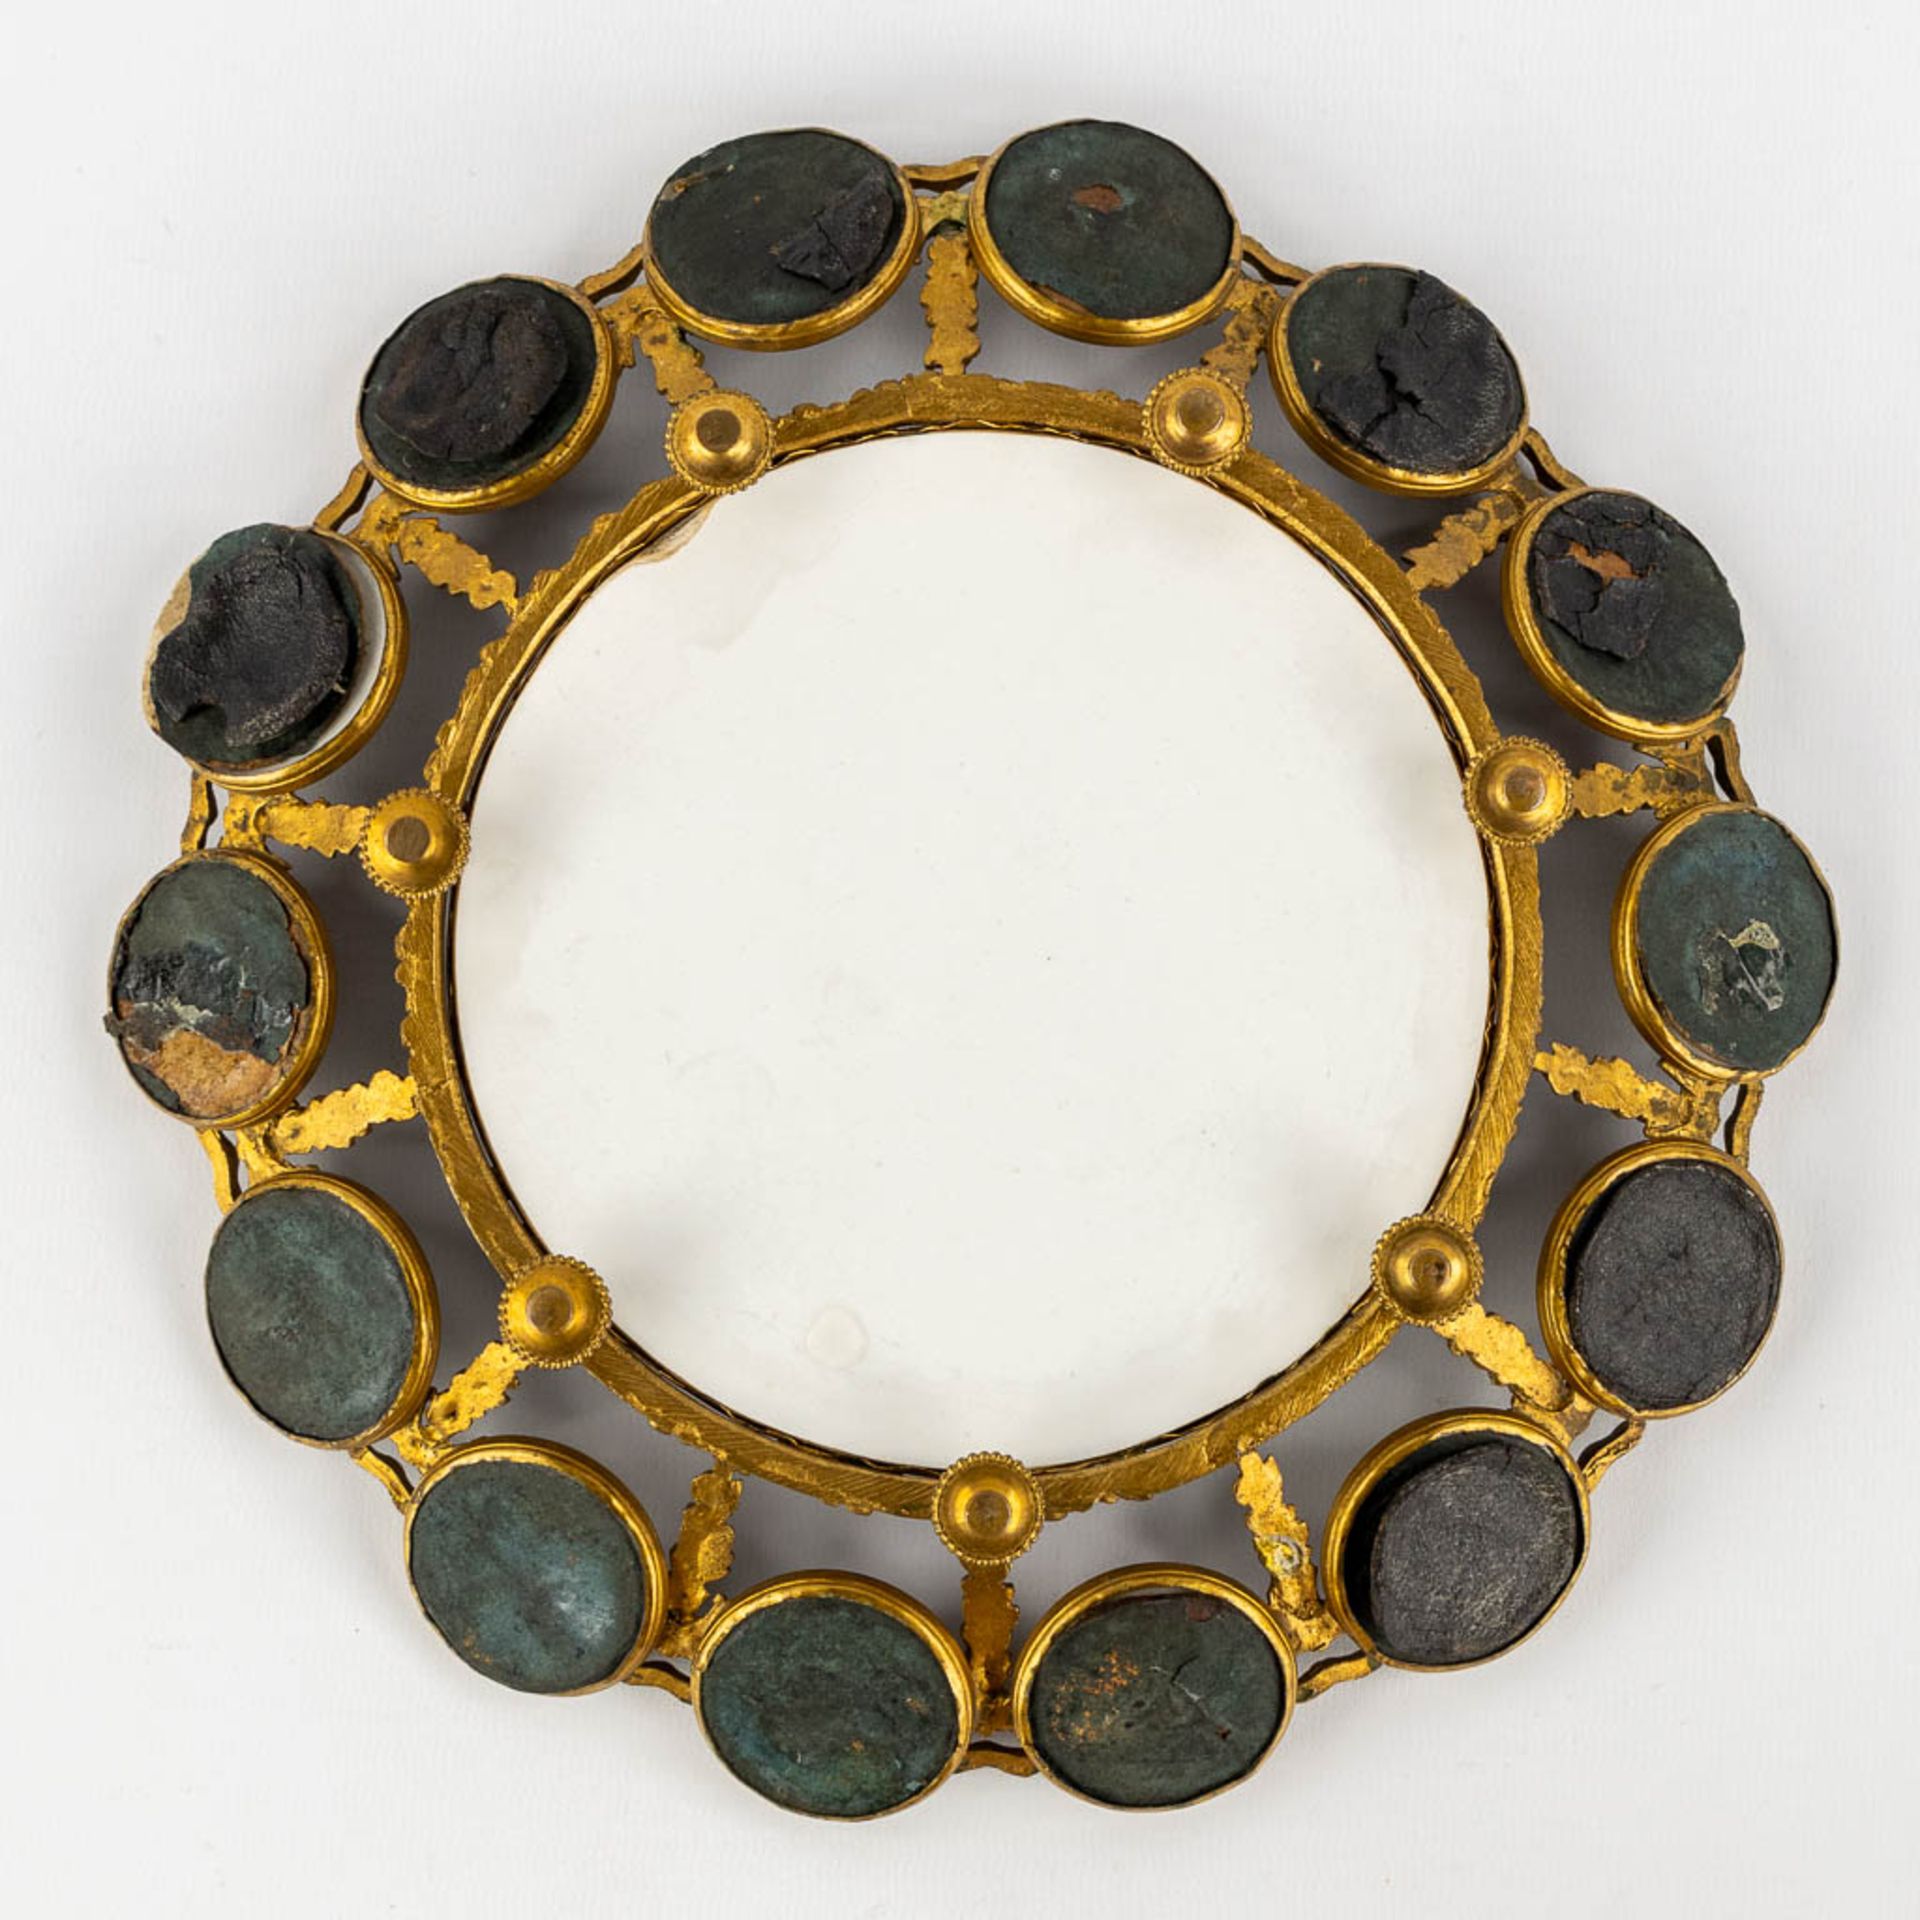 A highly decorative serving plate, gilt bronze mounted with hand-painted porcelain plaques, 19th C. - Image 6 of 8